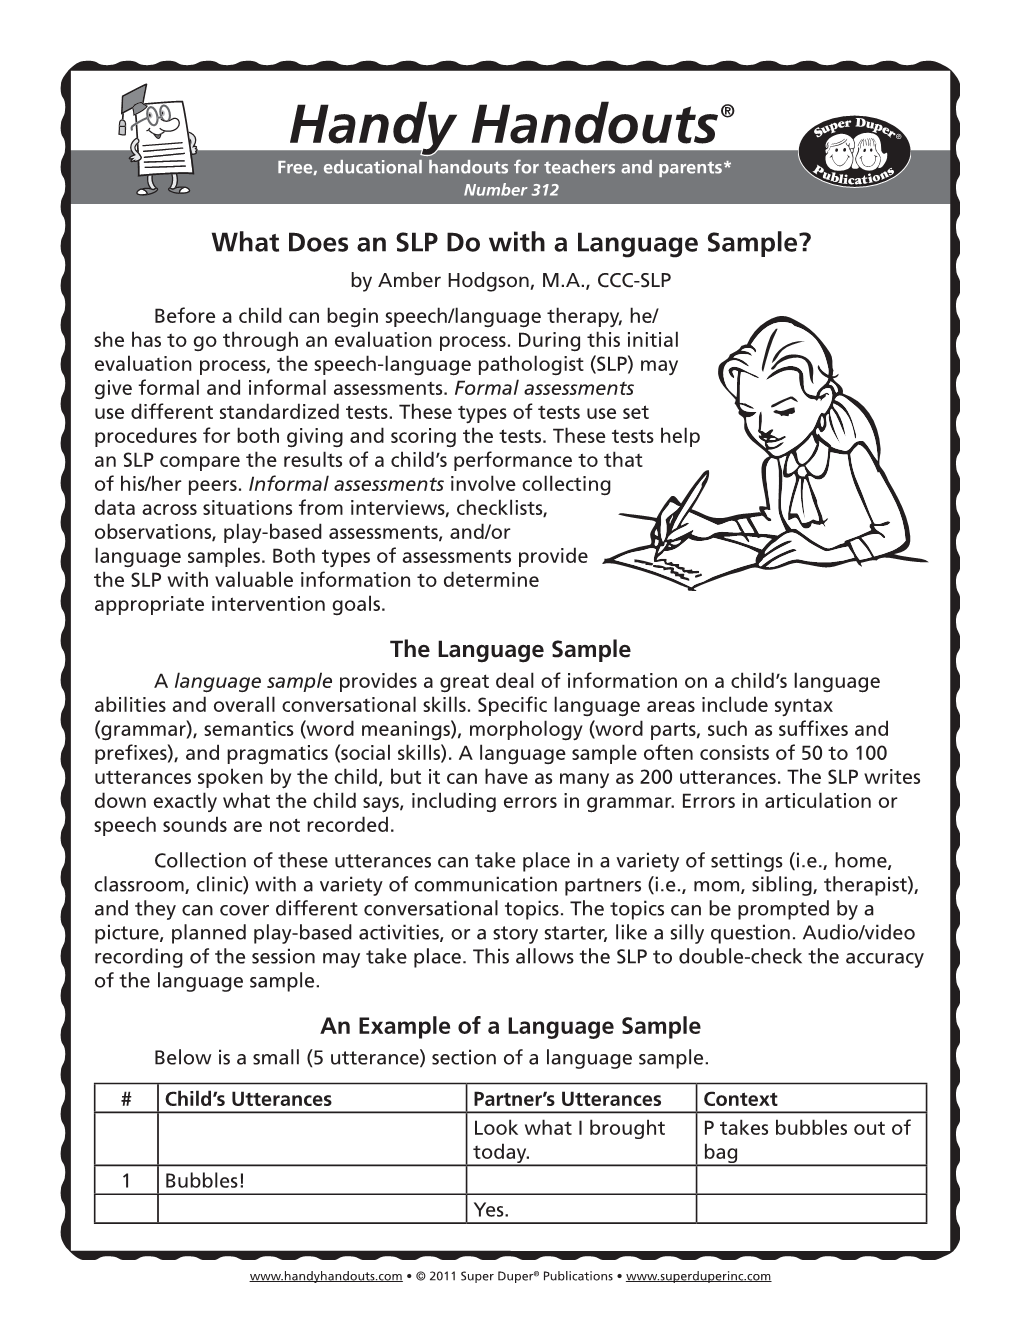 What Does an SLP Do with a Language Sample?